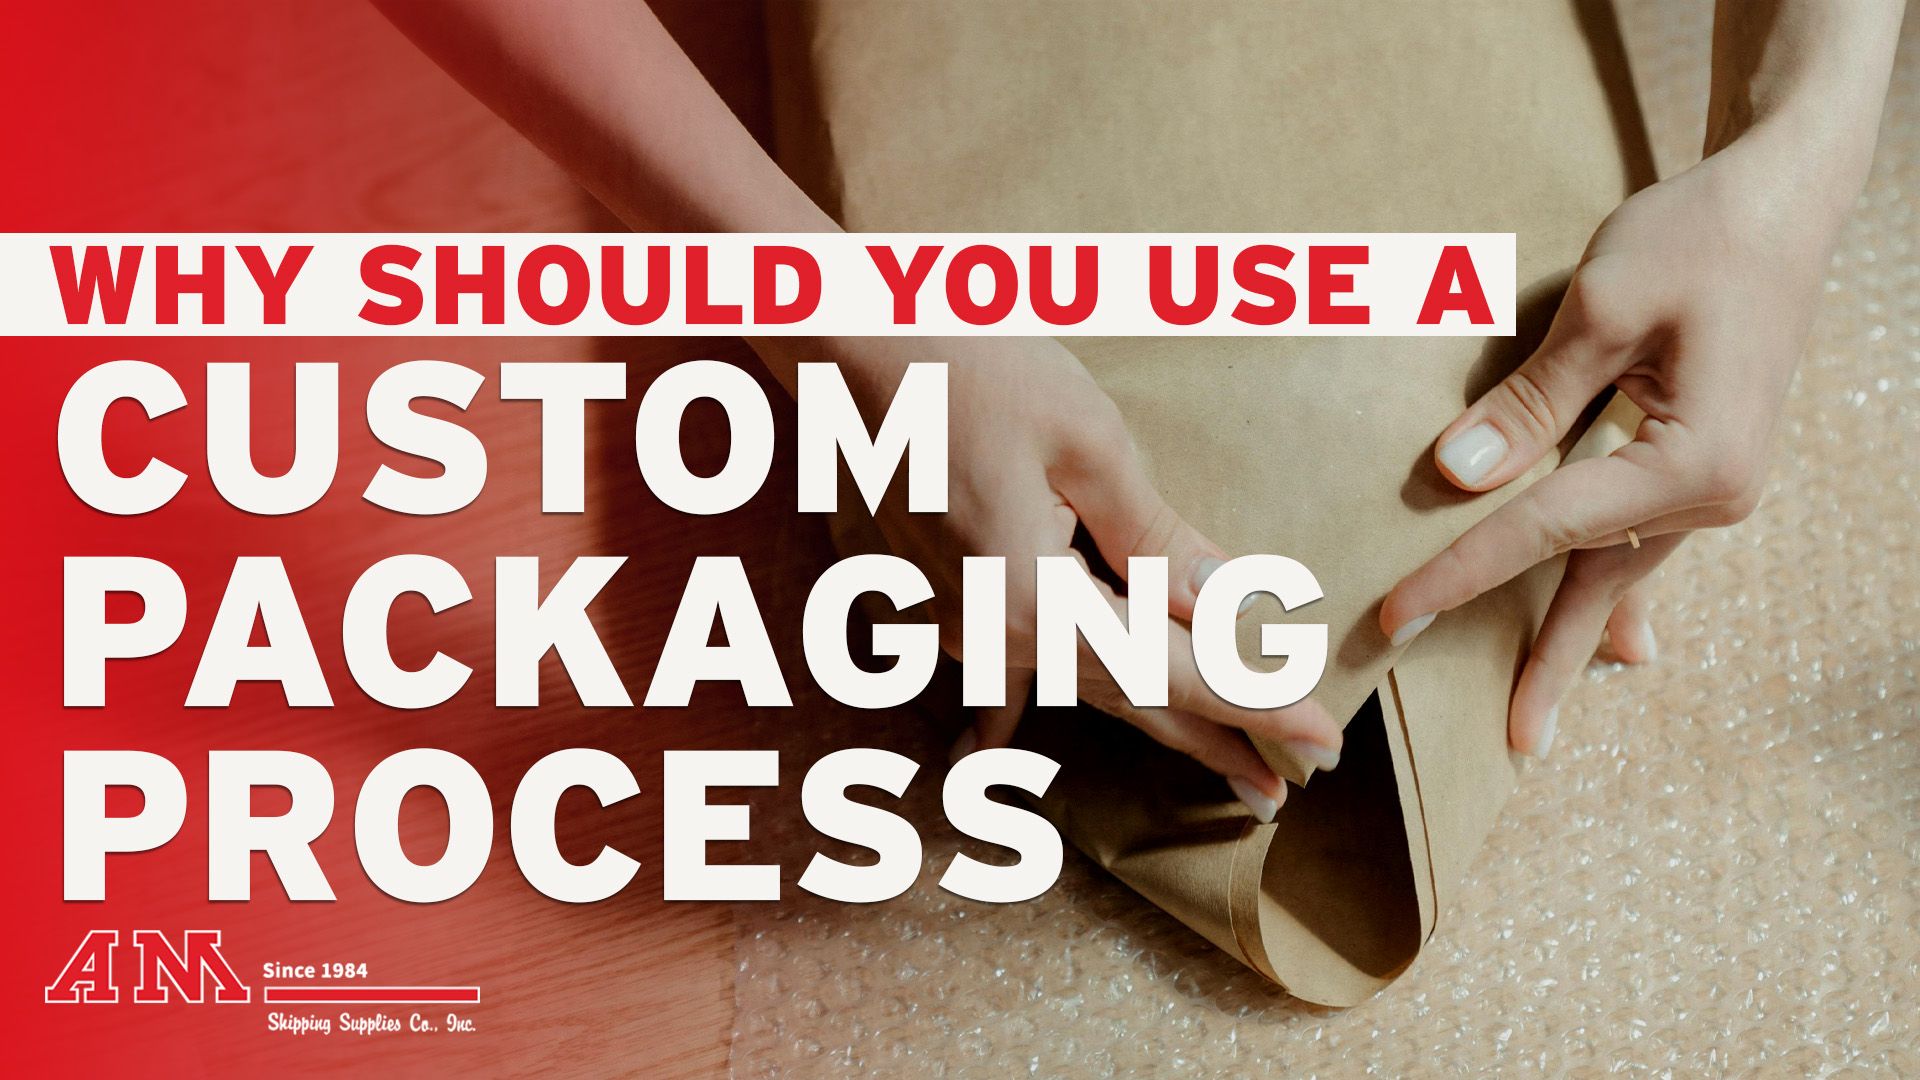 Why Should You Use a Custom Packaging Process